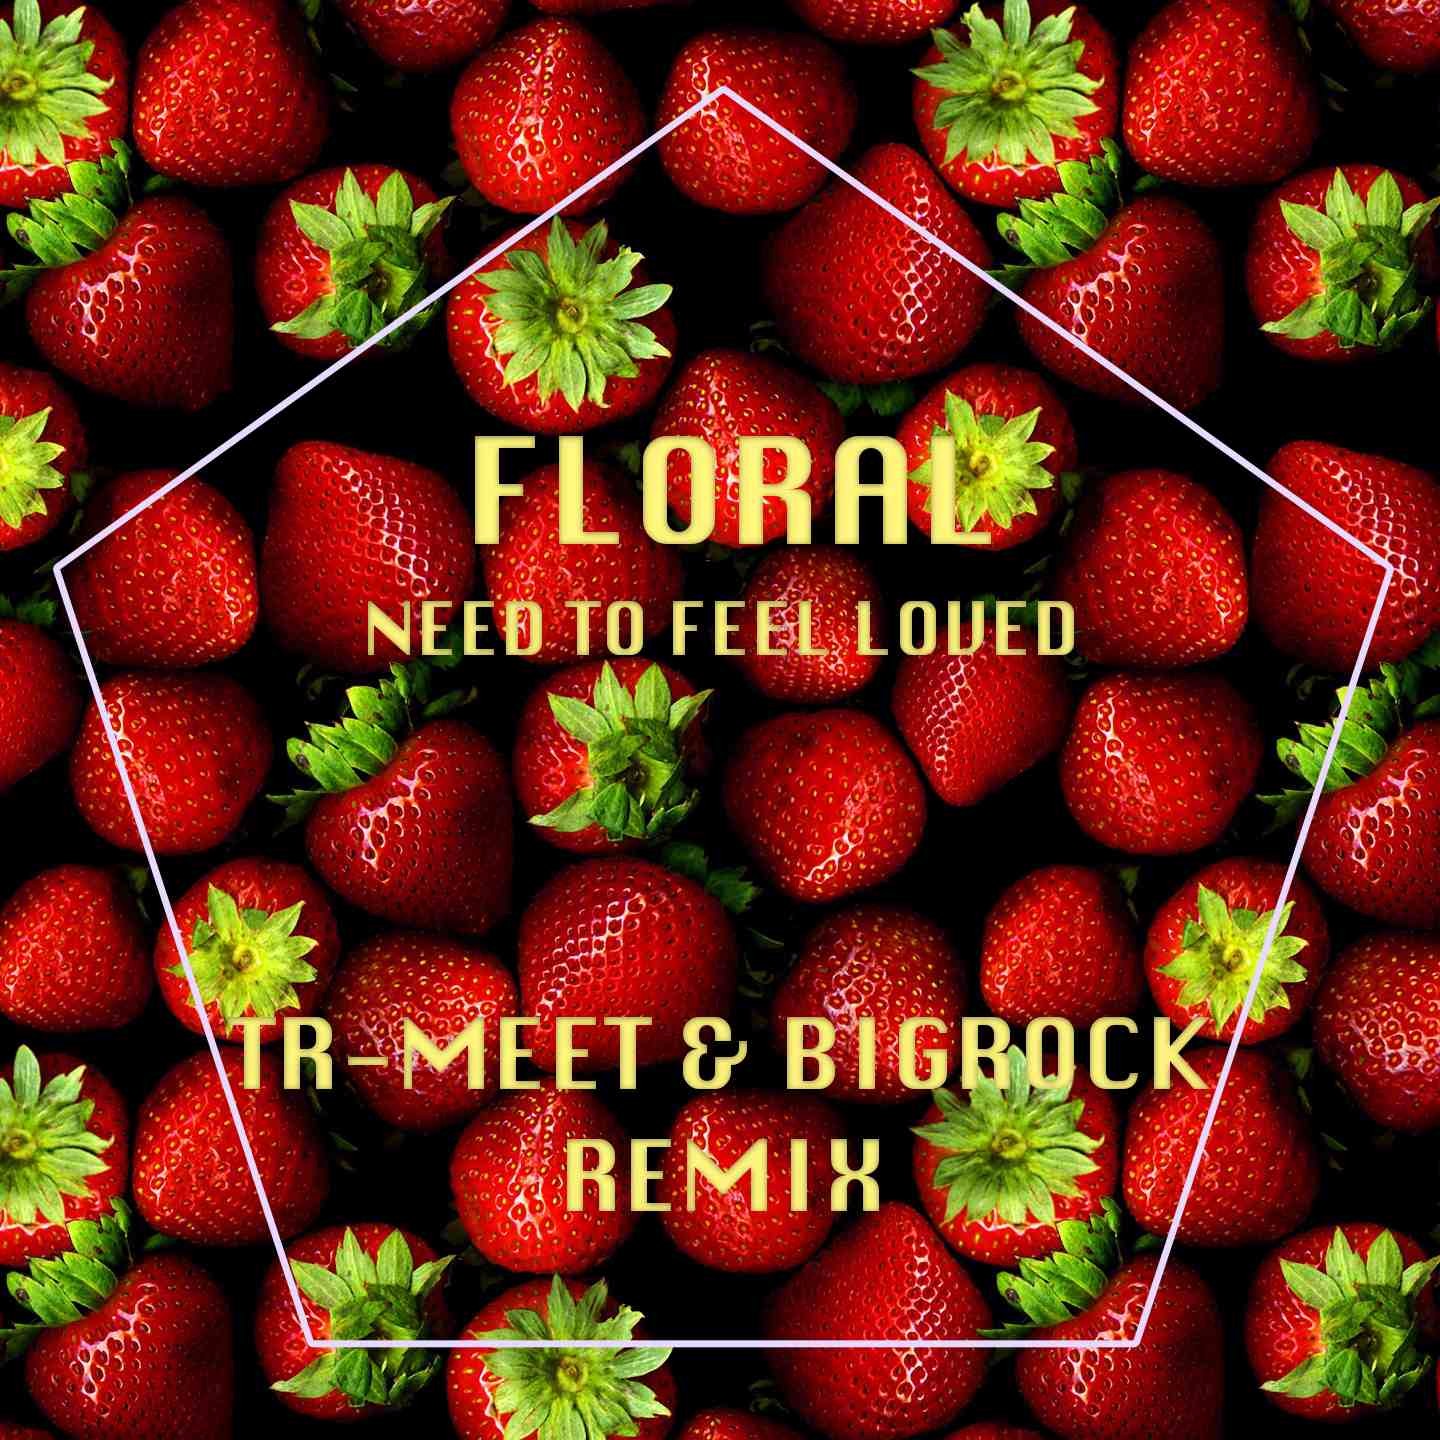 Floral - Need To Feel Loved (Tr-Meet BigRock Remix)